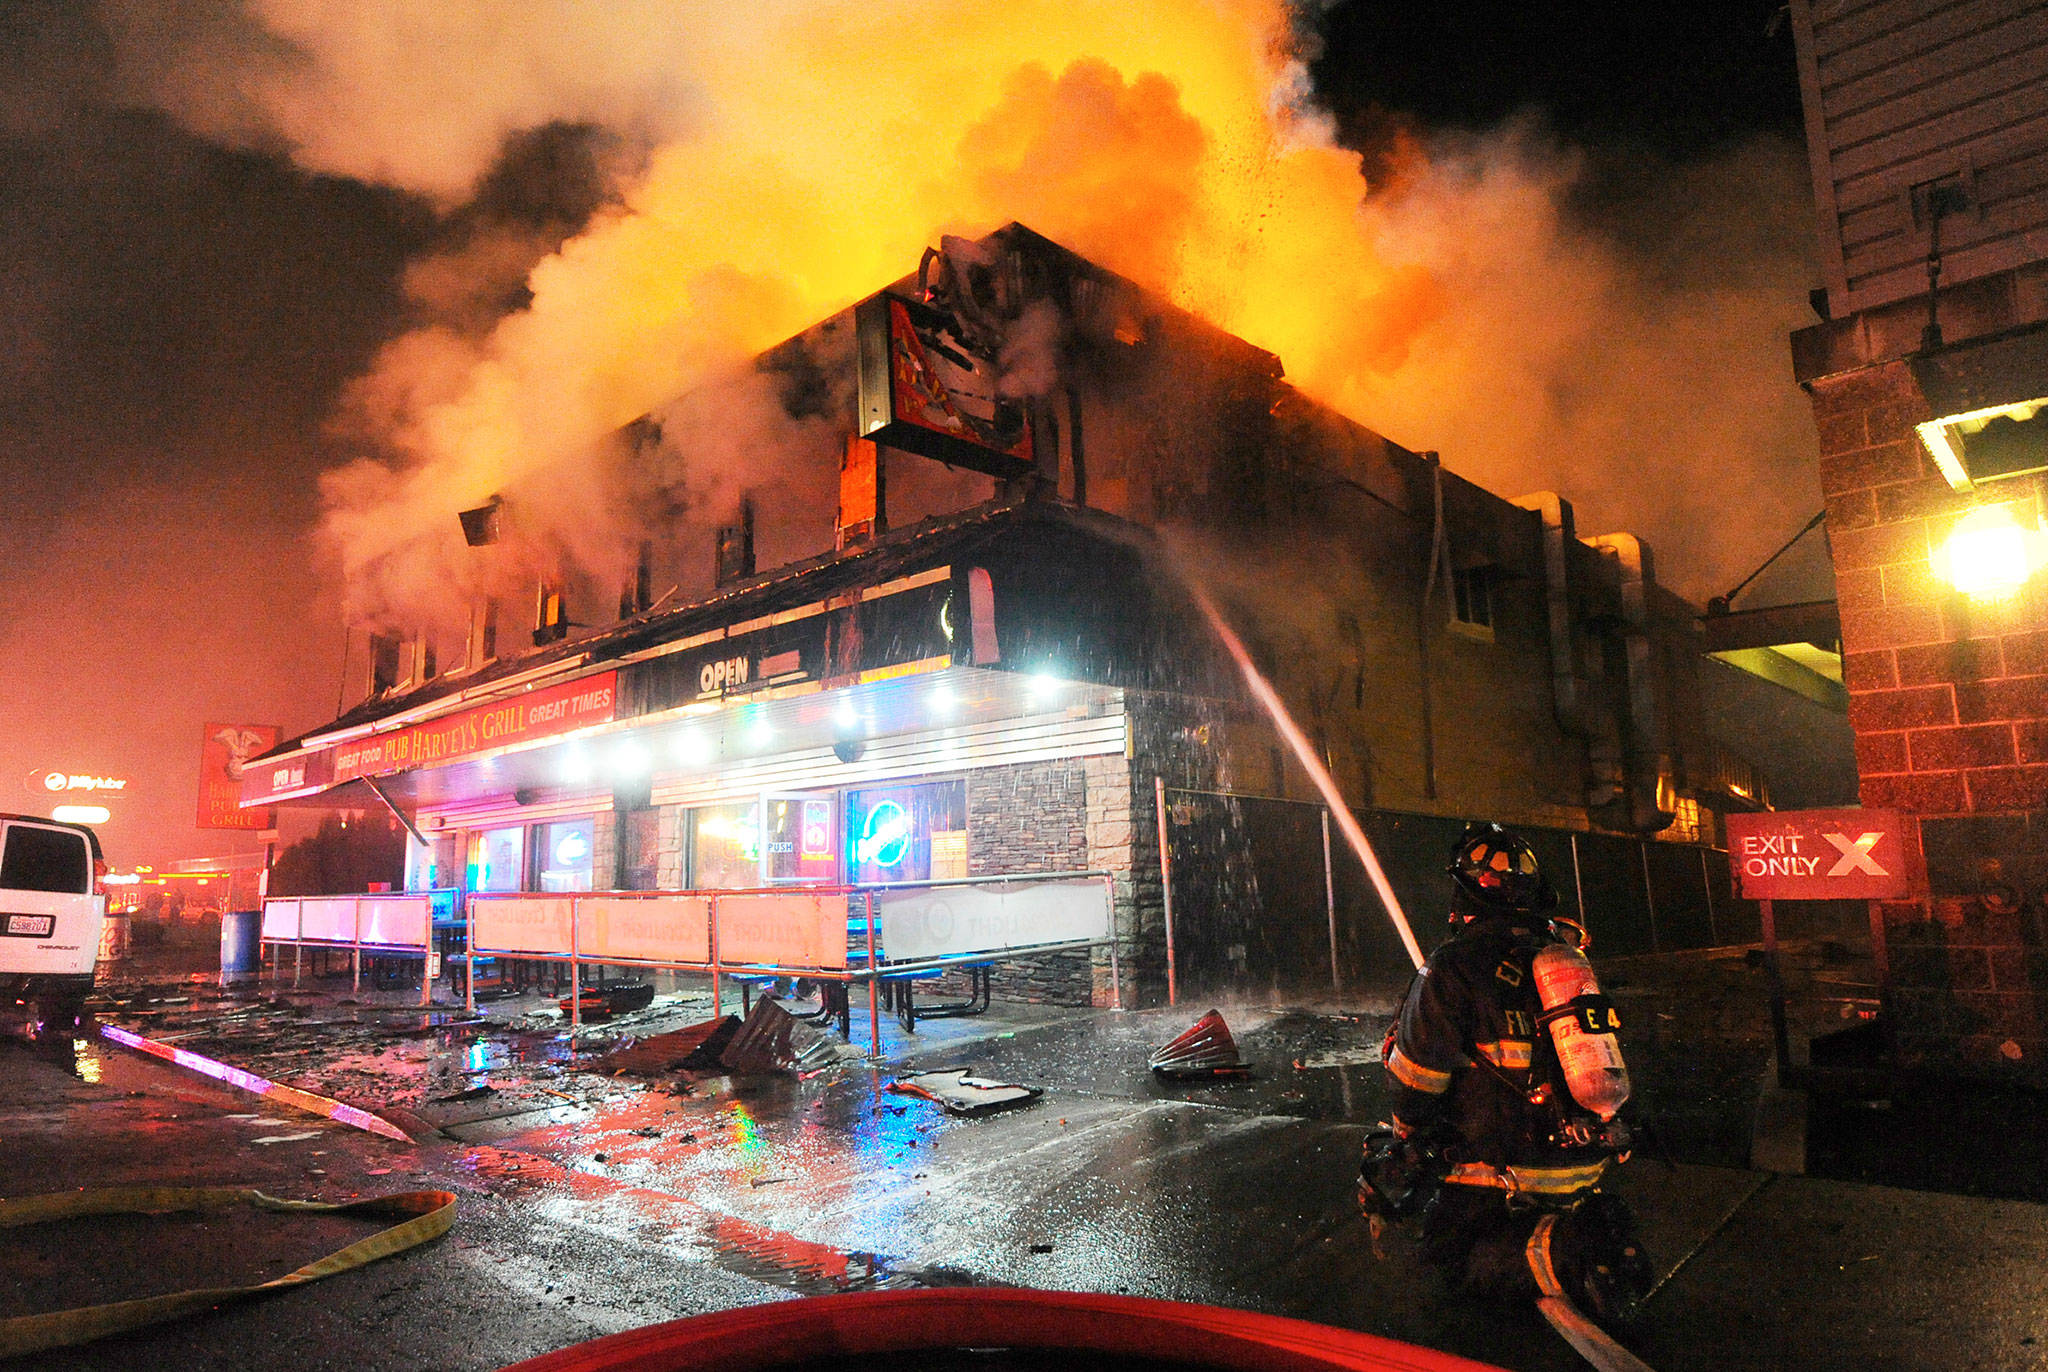 Firefighters tackle a two-alarm fire that gutted Harvey’s Pub early Sunday morning on Broadway in Everett. (Doug Ramsay / For The Herald)